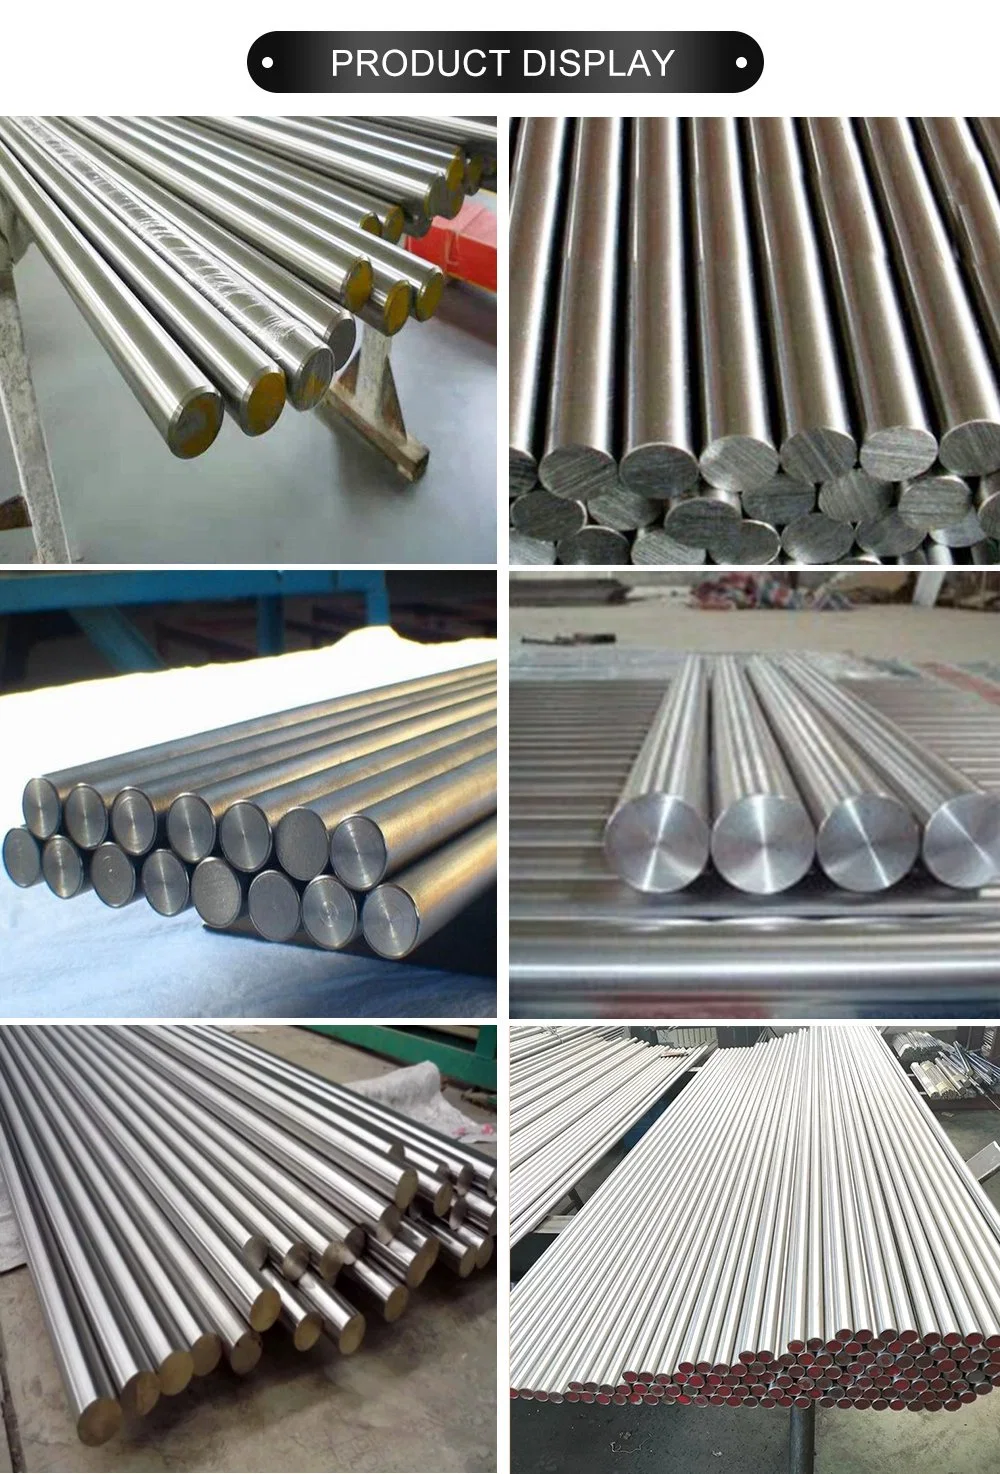 Stainless Steel Bar 8mm 3mm 6mm 190mm 410 201 304 310S 316 321 904L ASTM A276 2205 Metal Rod Round Bar Metal Rod